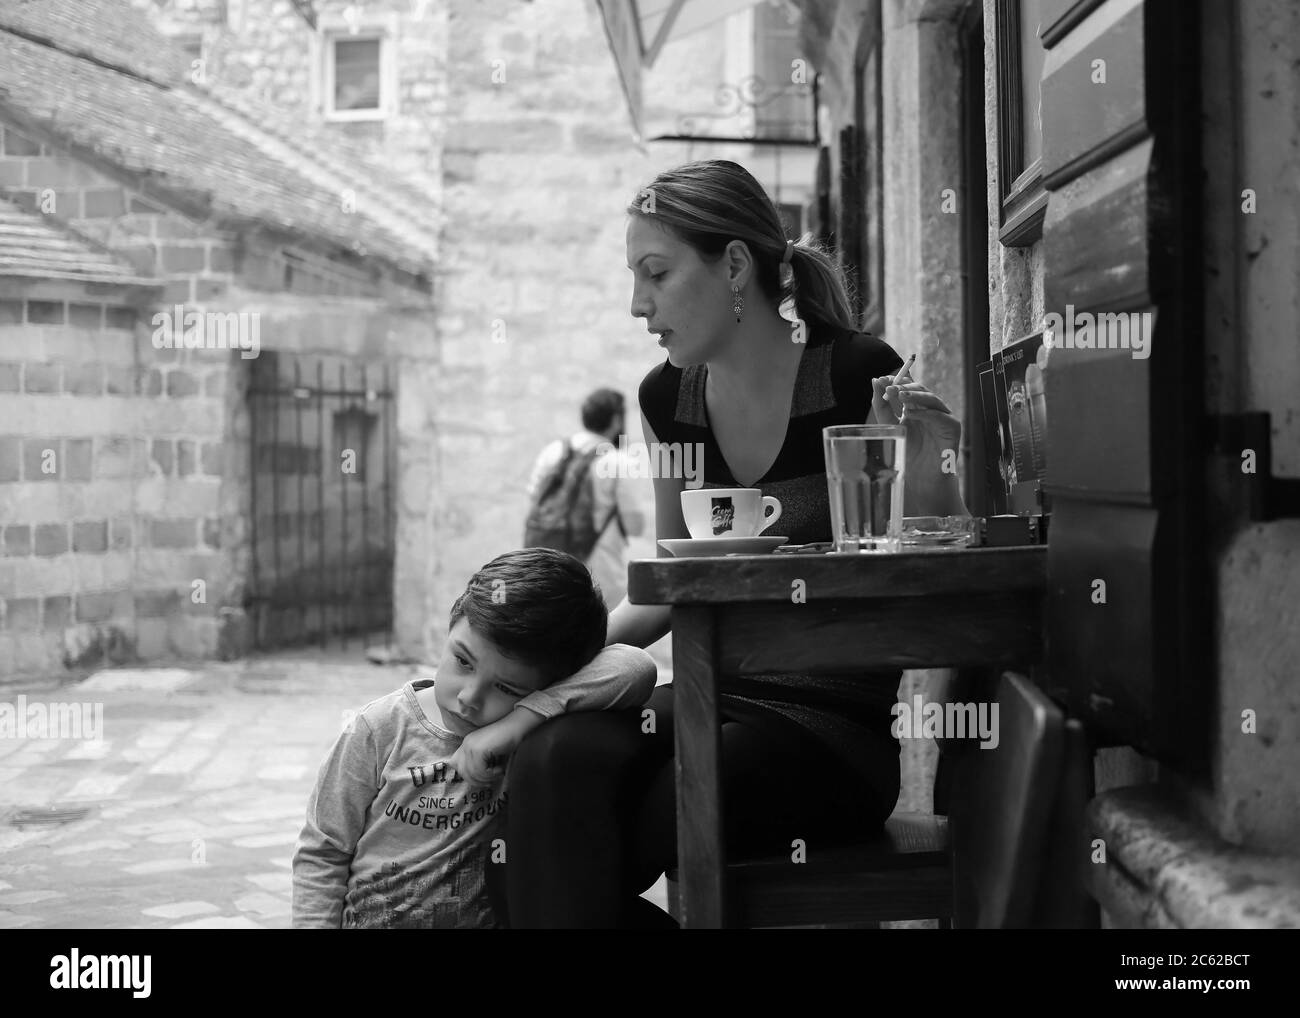 Montenegro, Sep 22, 2019: Sleepy boy and his mother spend time at a street café in Kotor Old Town (B/W) Stock Photo